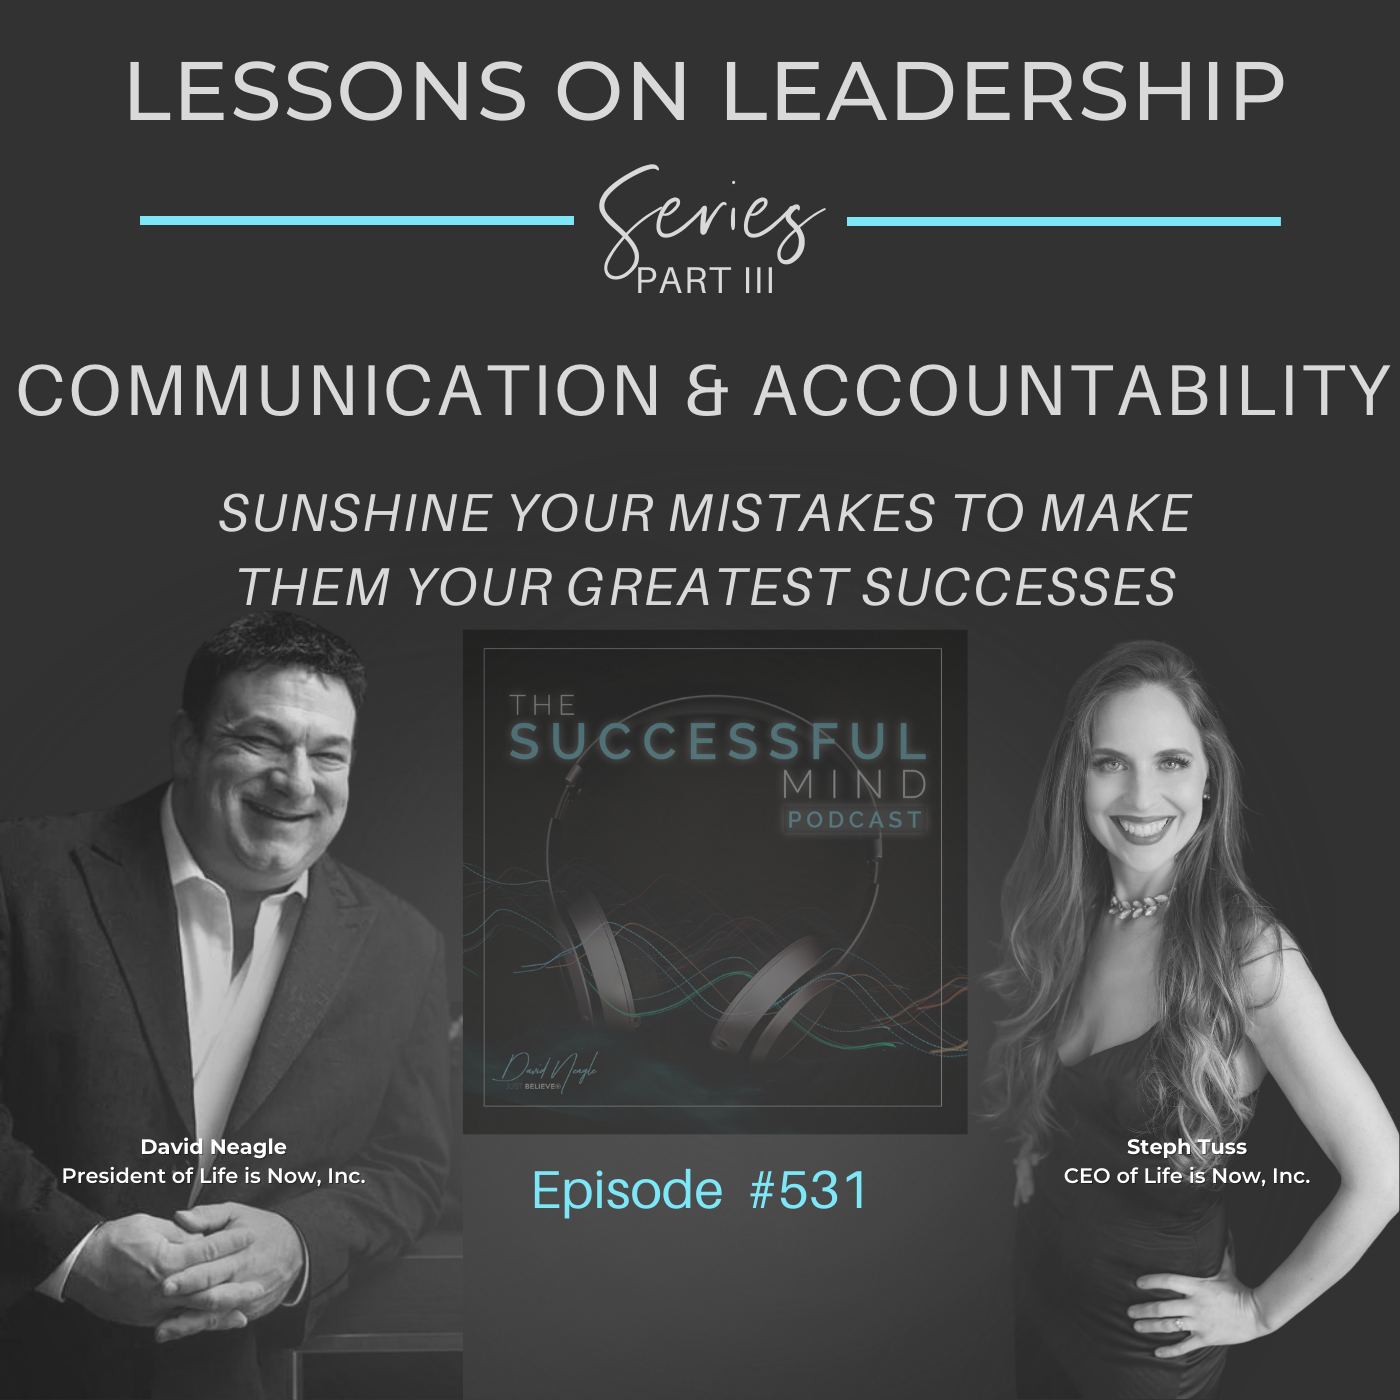 Lessons on Leadership - Part III - Communication & Accountability: Sunshine Your Mistakes to Make Them Your Greatest Successes